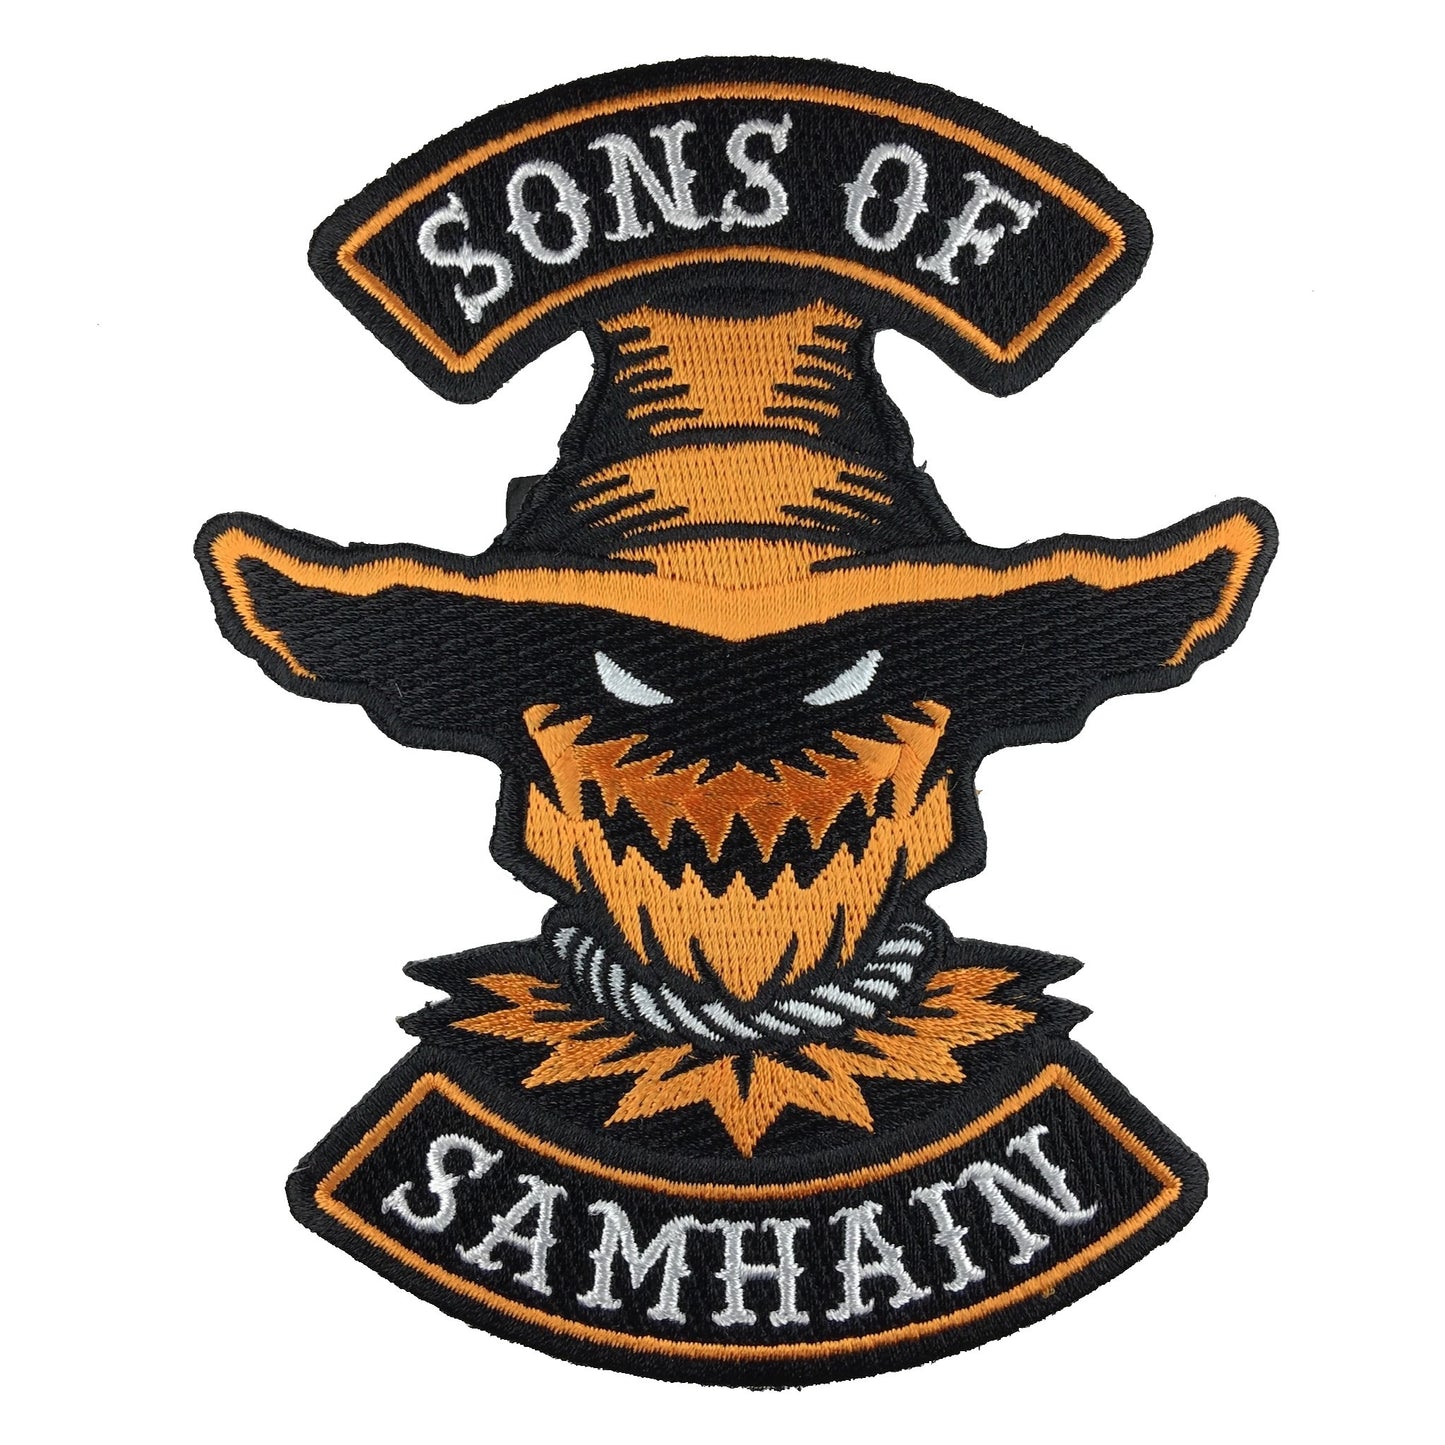 Sons Of Samhain Scarecrow Halloween embroidered patch motorcycle biker patch